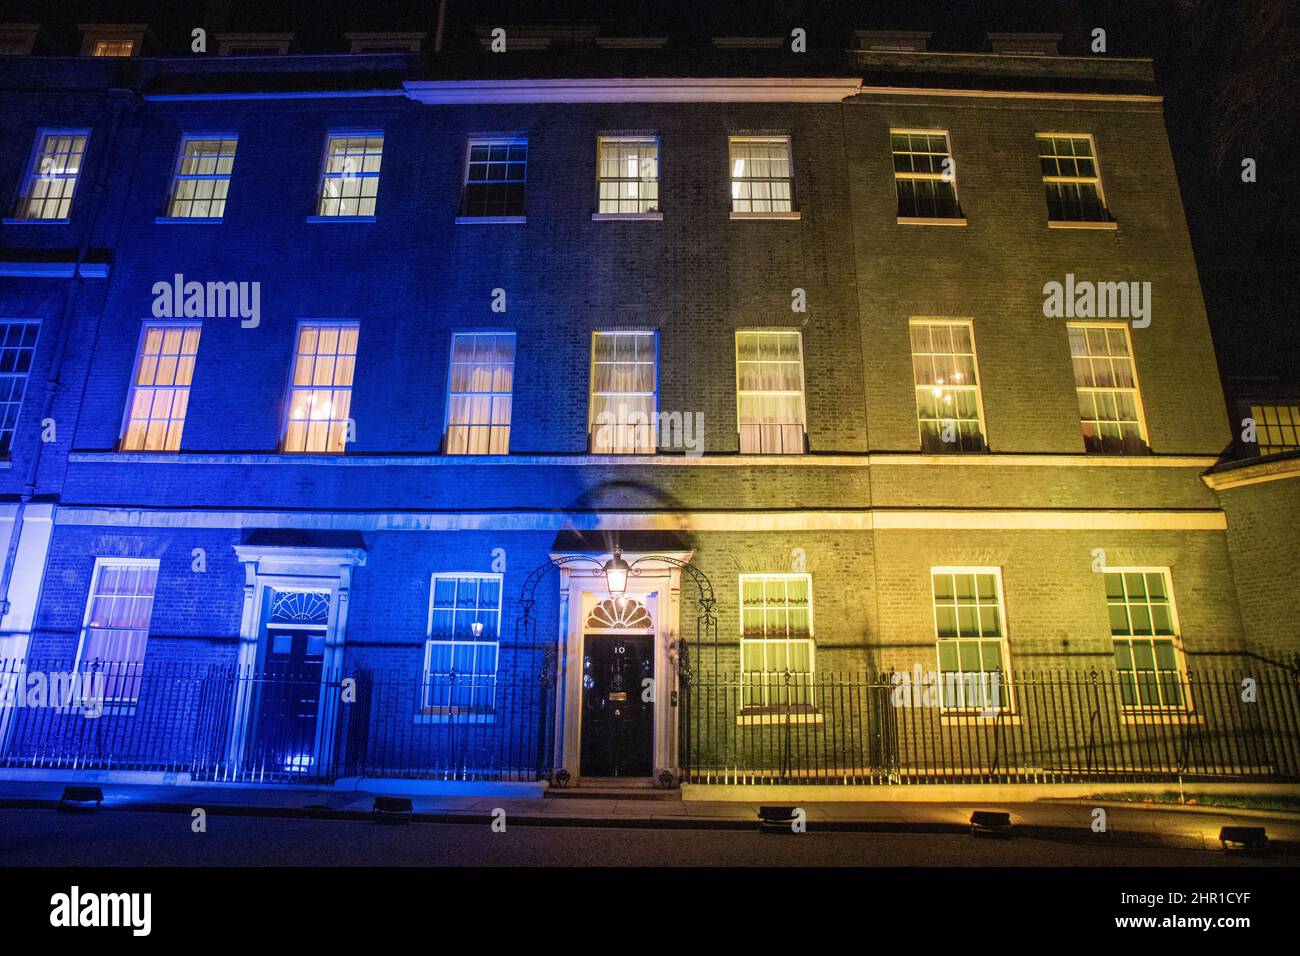 LONDON, FEBRUARY 24 2022, 10 Downing Street in London lit up wit the colours of the ukraine flag solidarity with Ukraine following Russia's invasion Credit: Lucy North/Alamy Live News Stock Photo